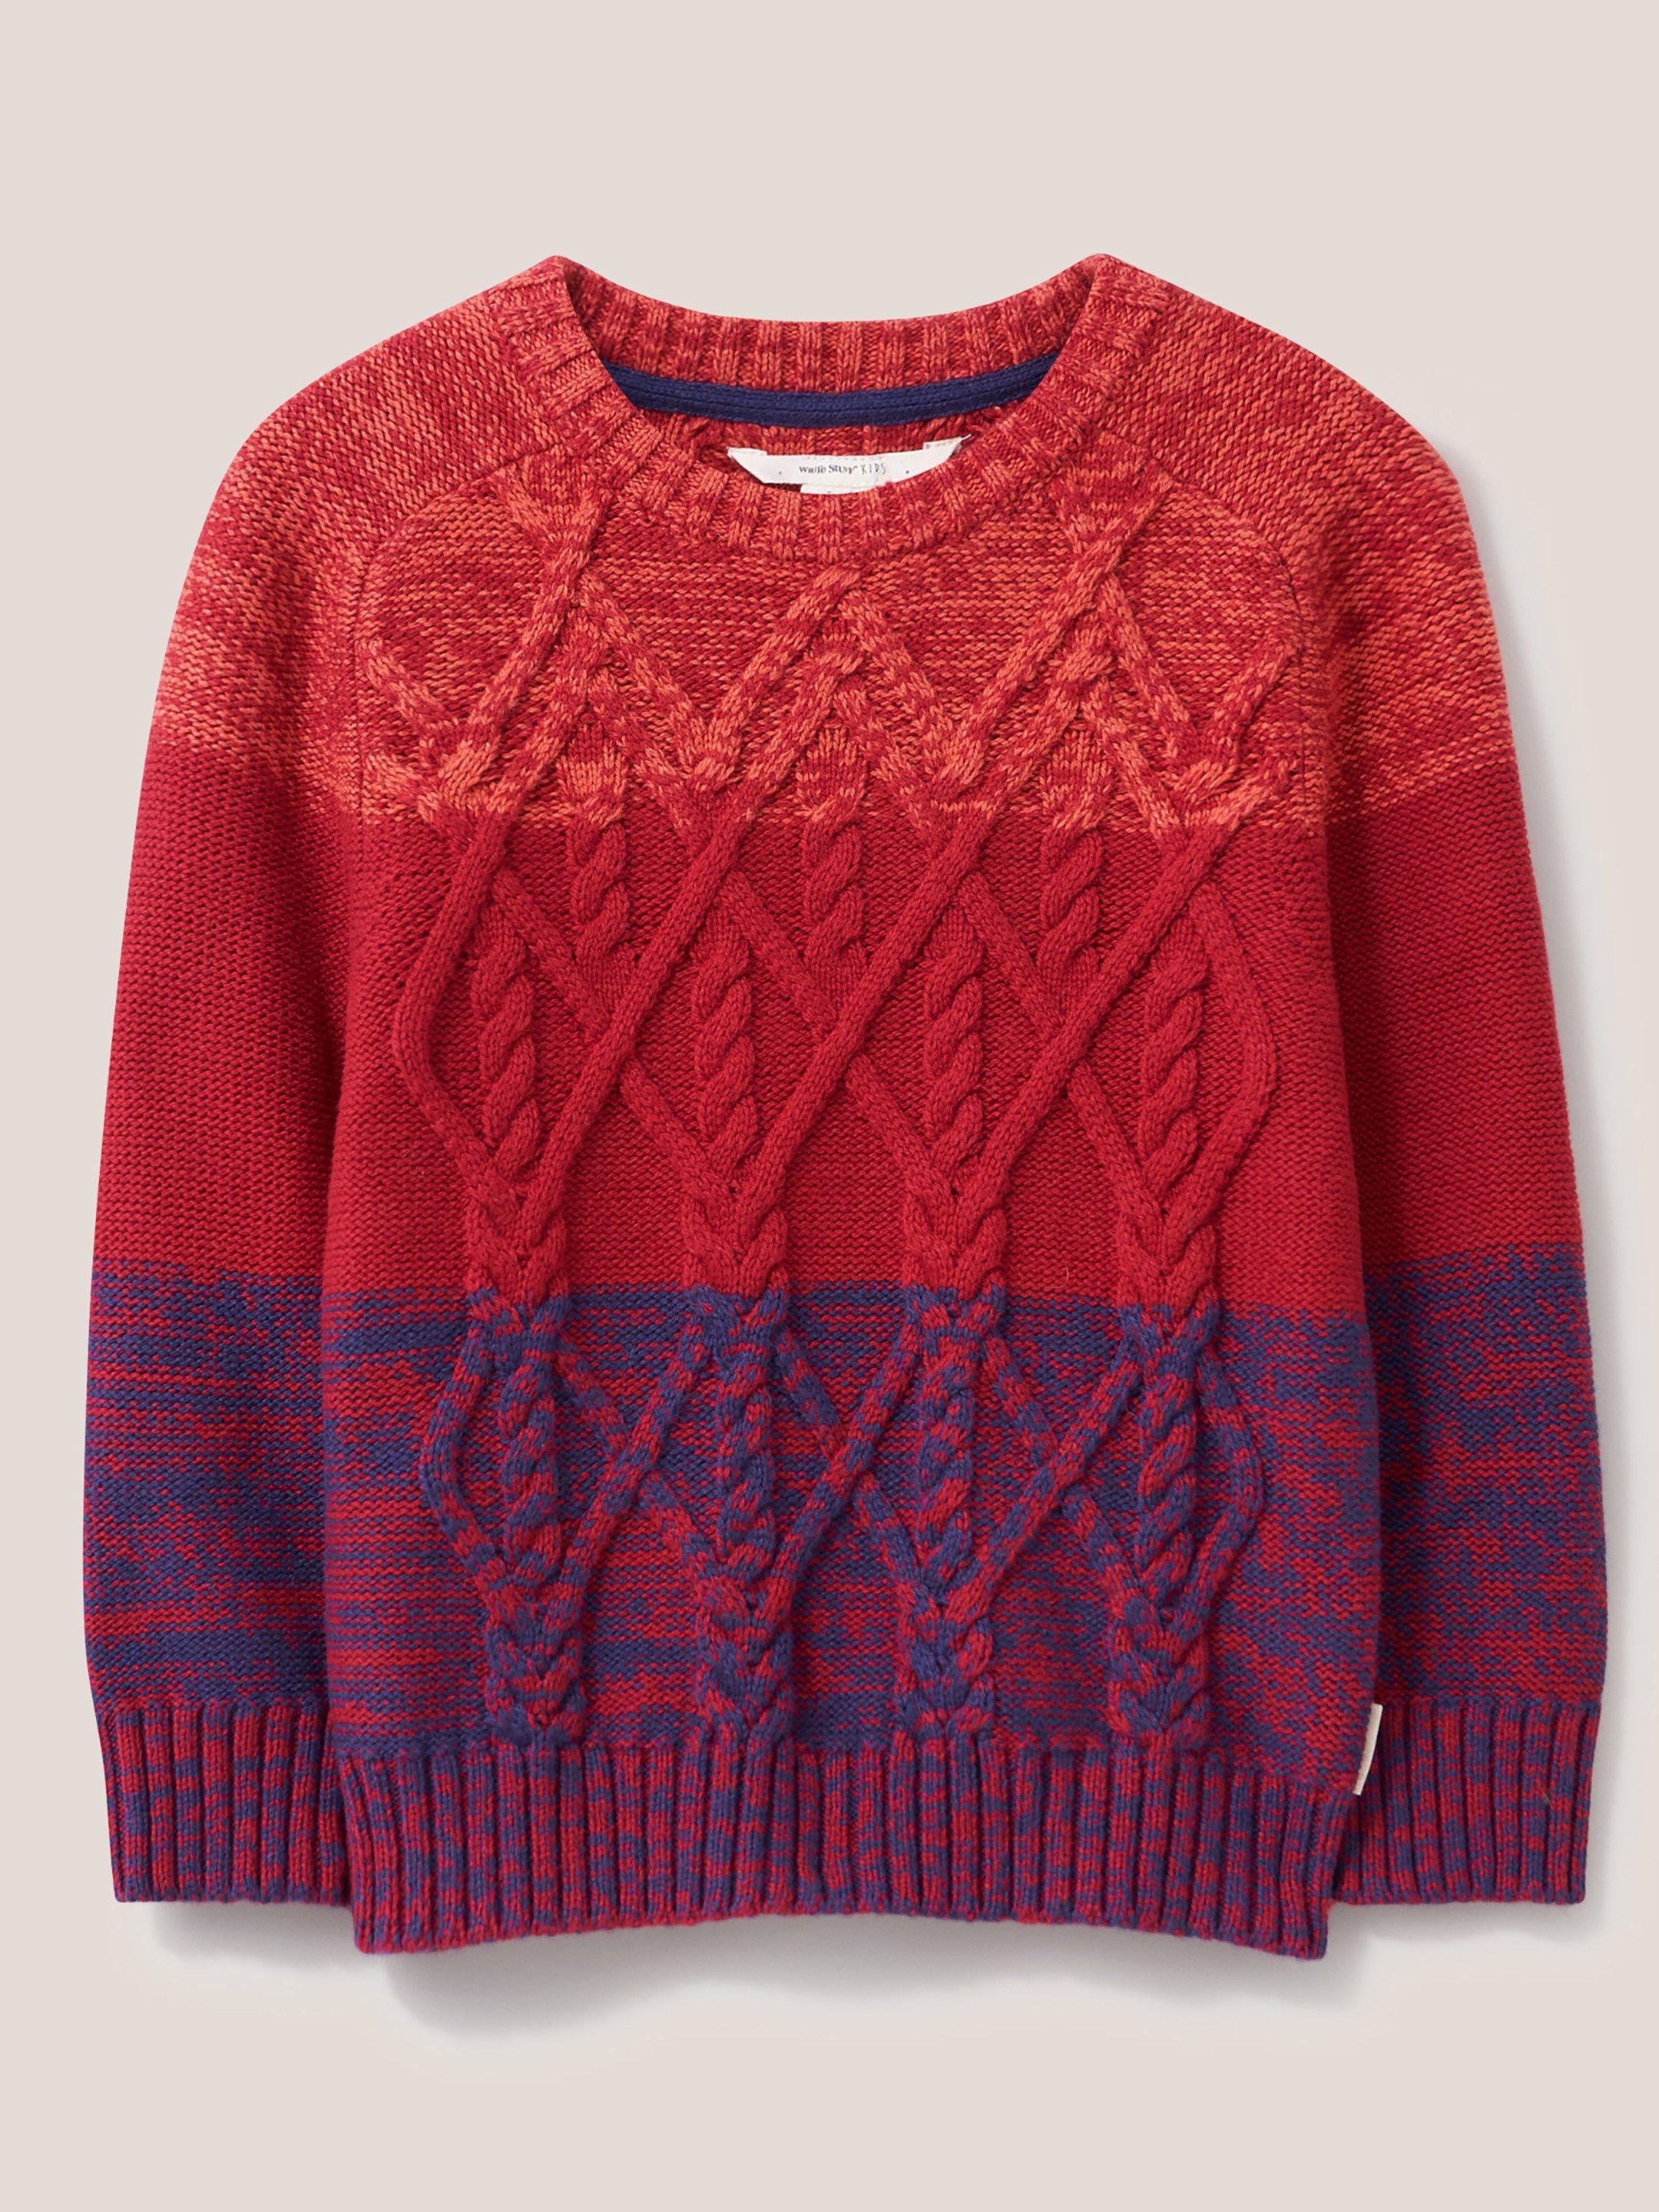 Cable Jumper in DK RED - FLAT FRONT